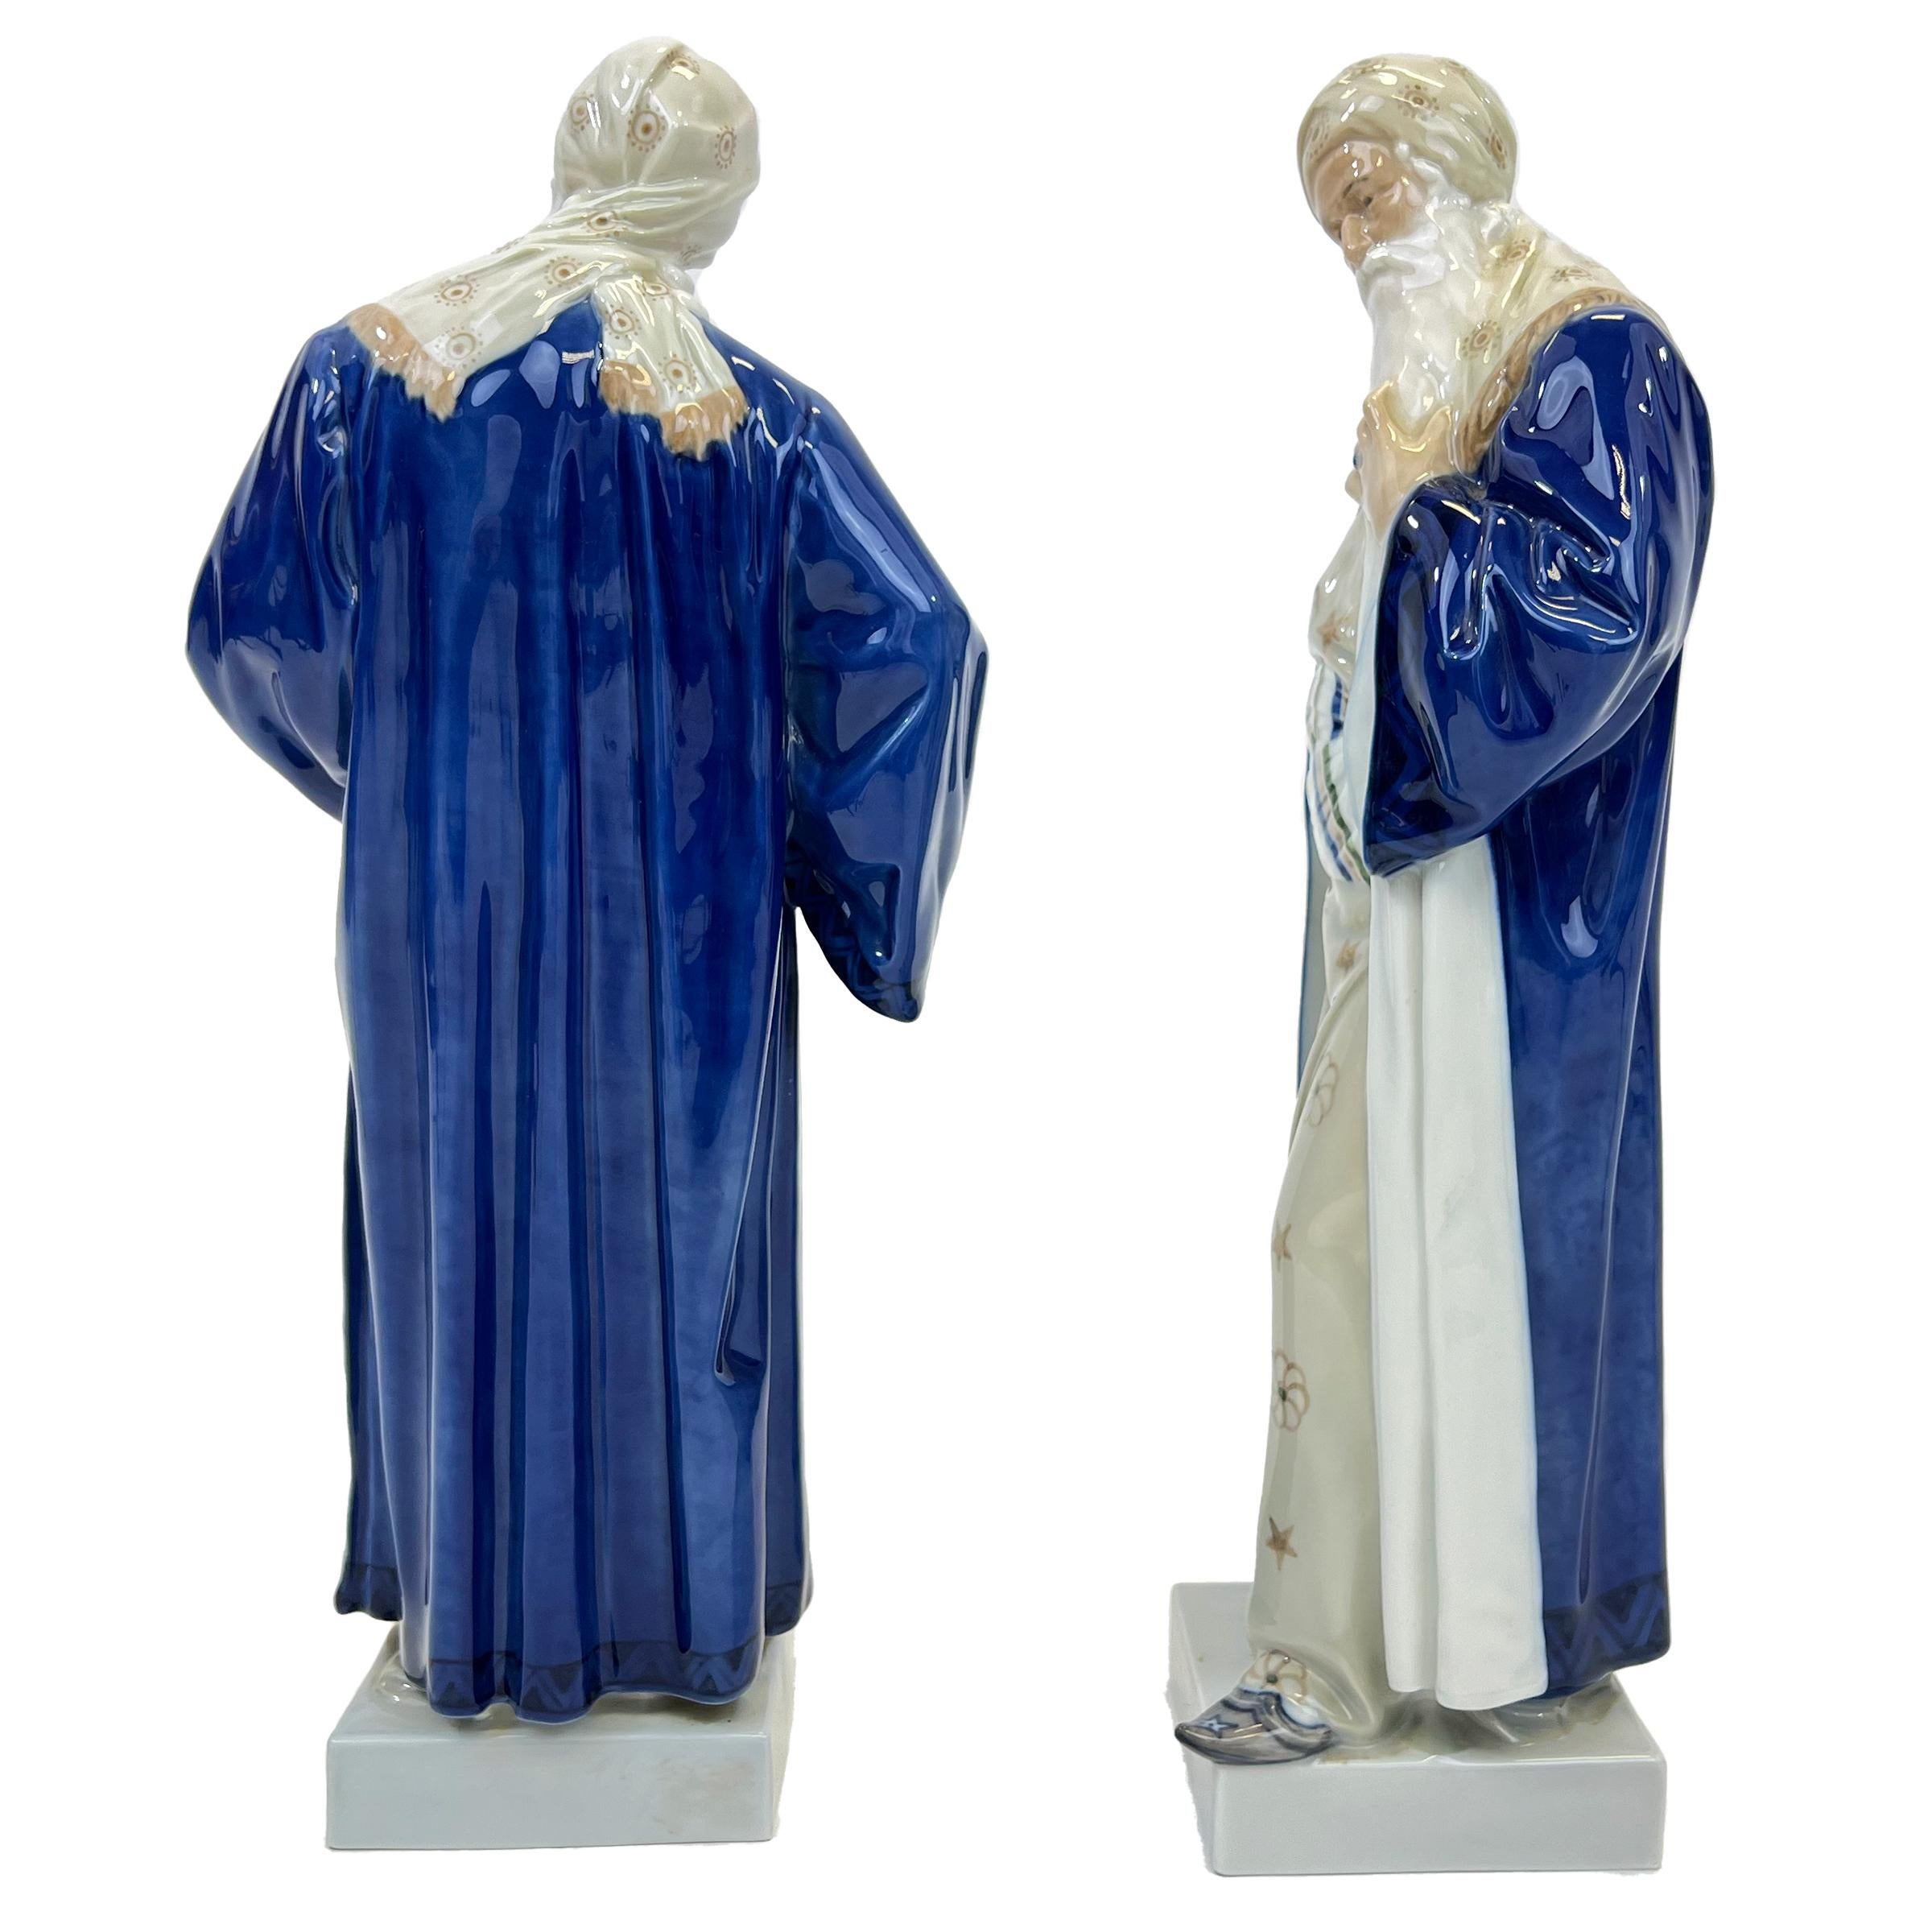 Two large porcelain figurine of Nathan the Wise originally designed by Adolf Ferdinand Walter Jahn. Long bearded man standing on a square base wearing blue robe, and matching long dress with head scarf, Stamped at the base.